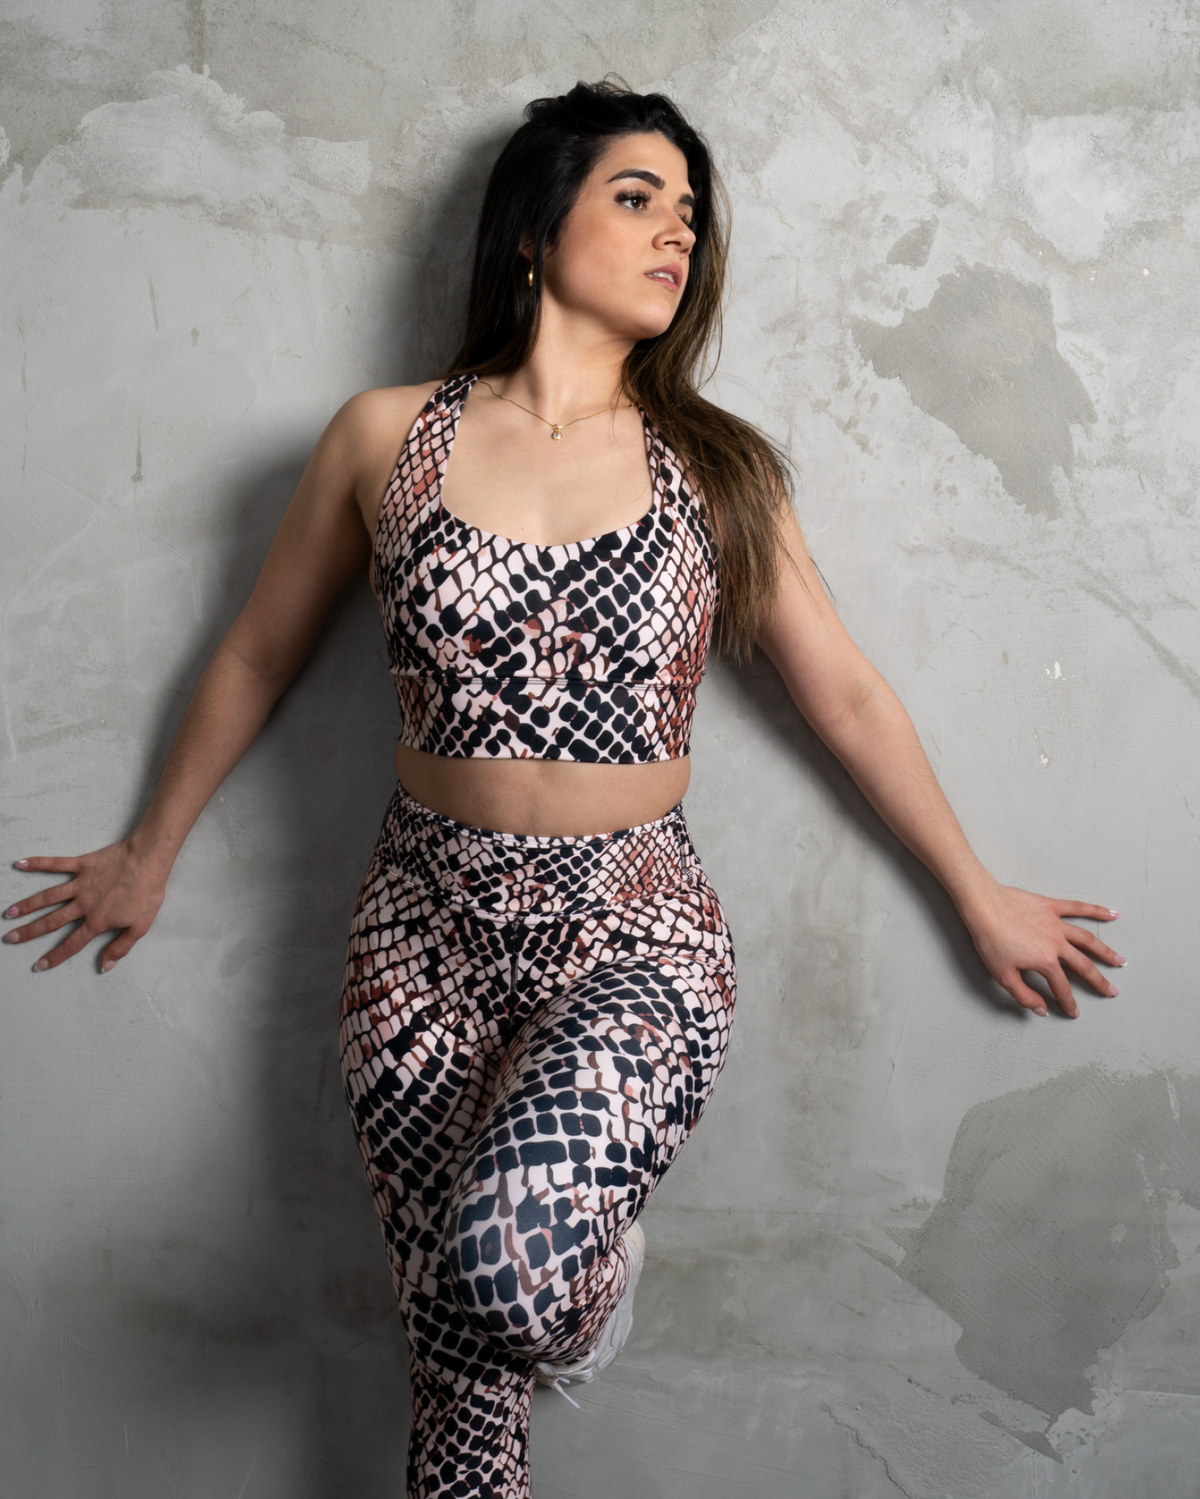 matching set high waisted leggings in animal pattern and crop top on concrete wall